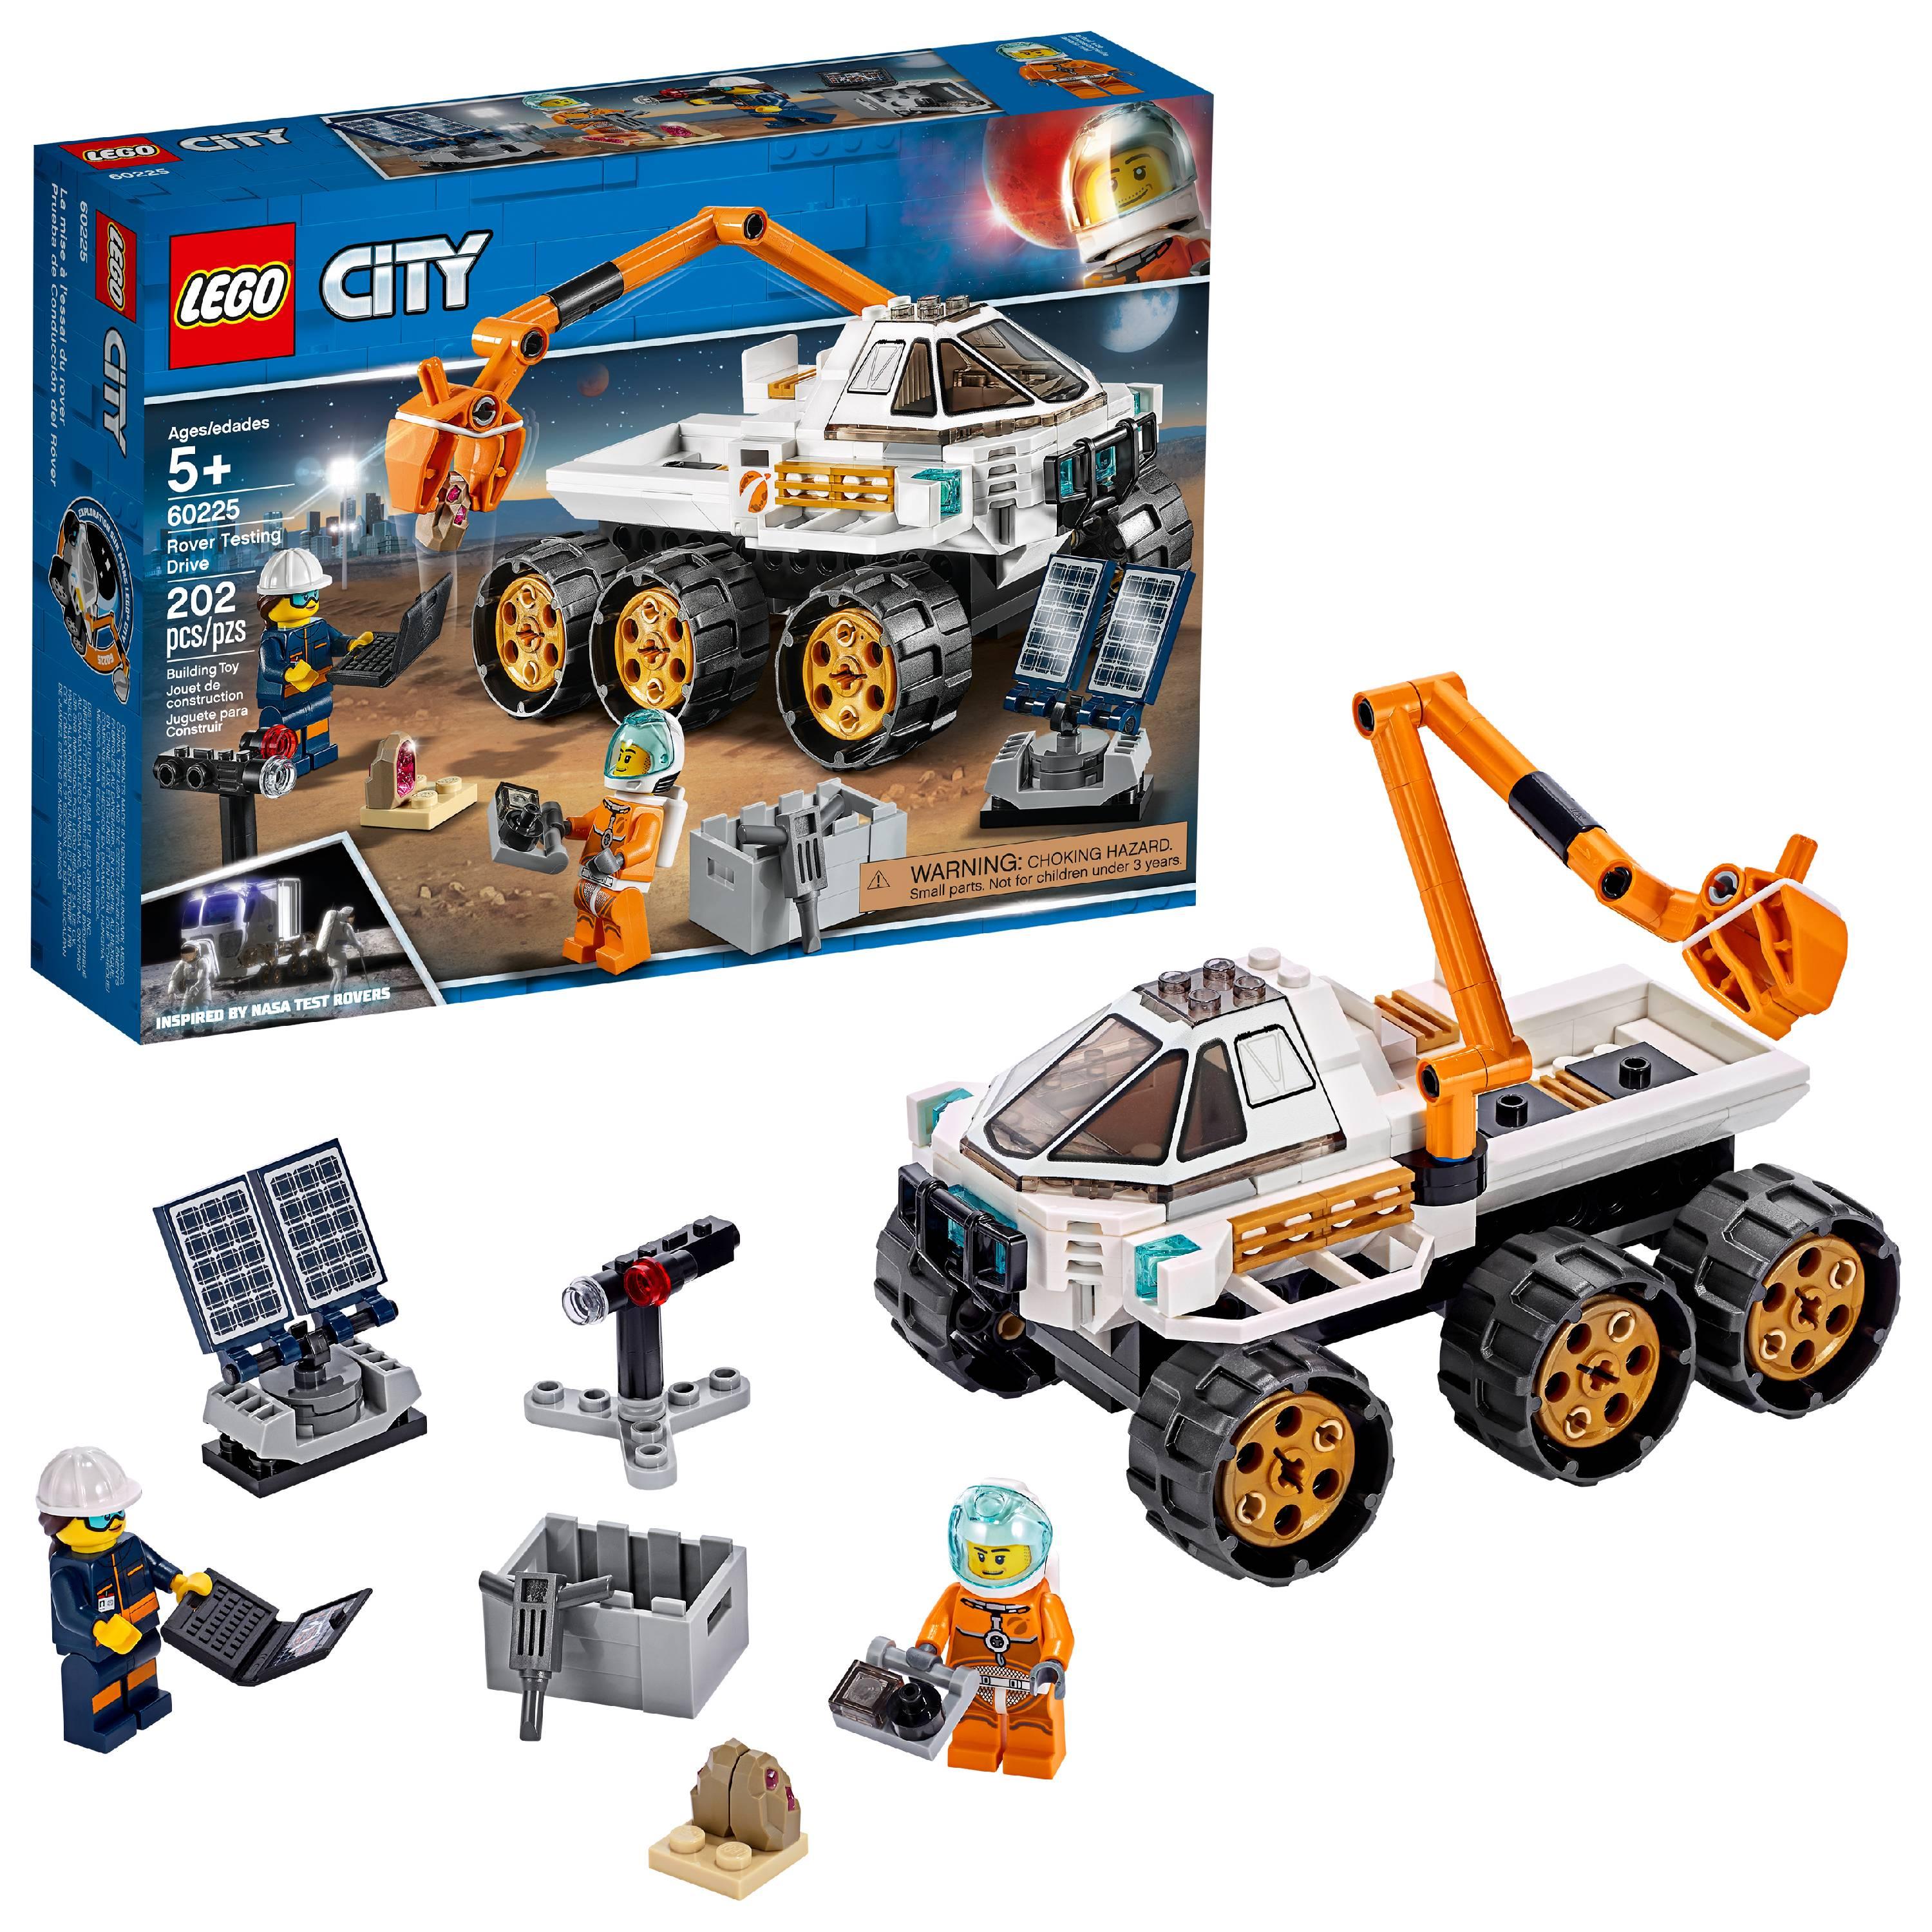 202-Piece LEGO City Space Rover Testing Drive Building Kit 60225 for $17.95